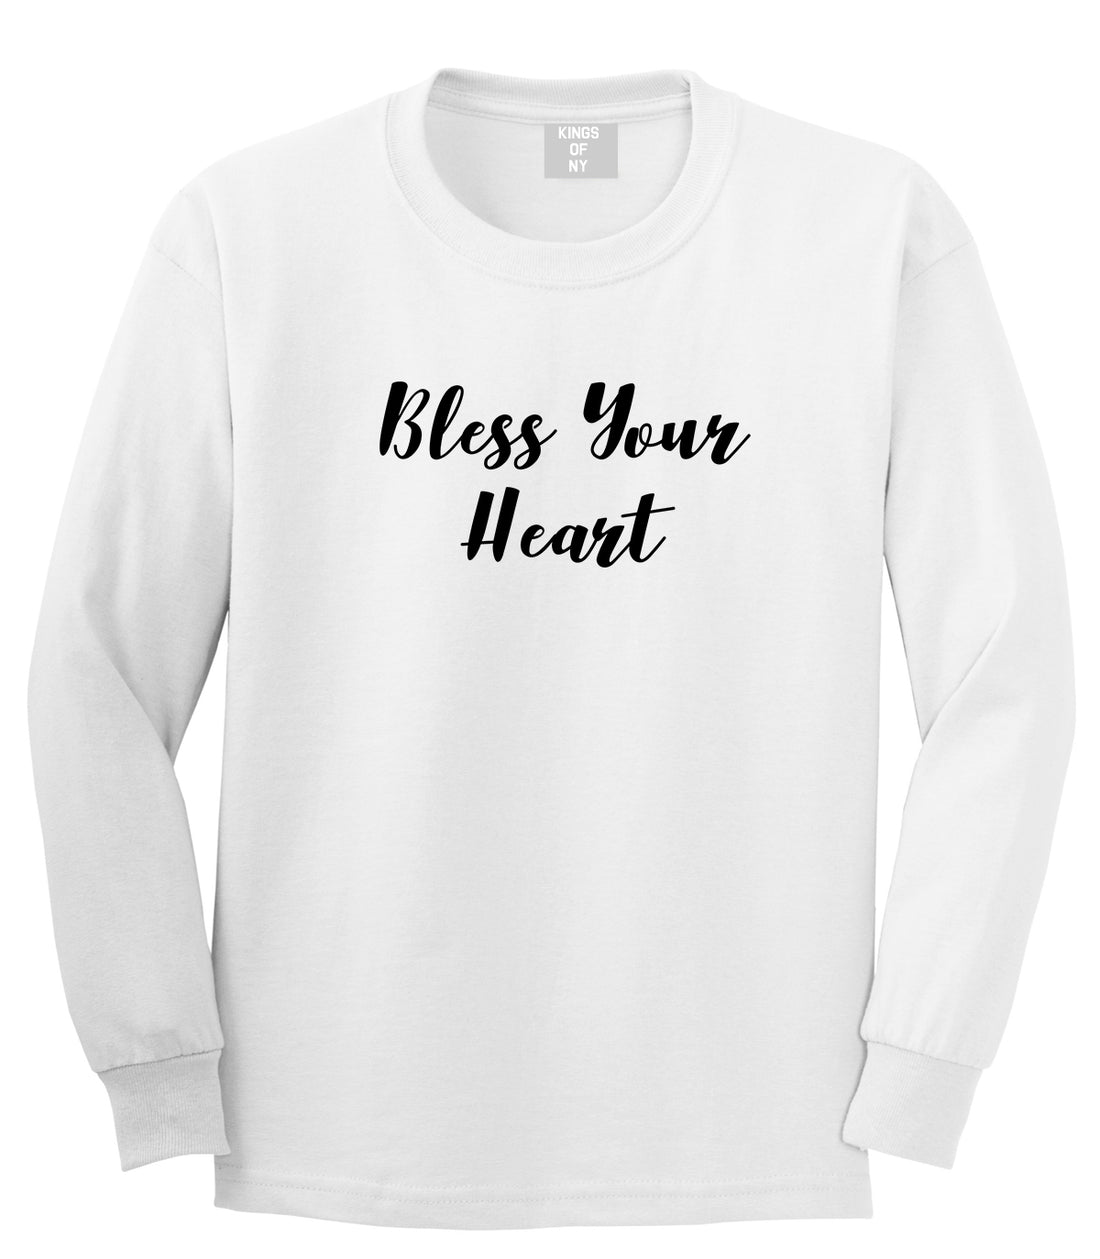 Bless Your Heart White Long Sleeve T-Shirt by Kings Of NY